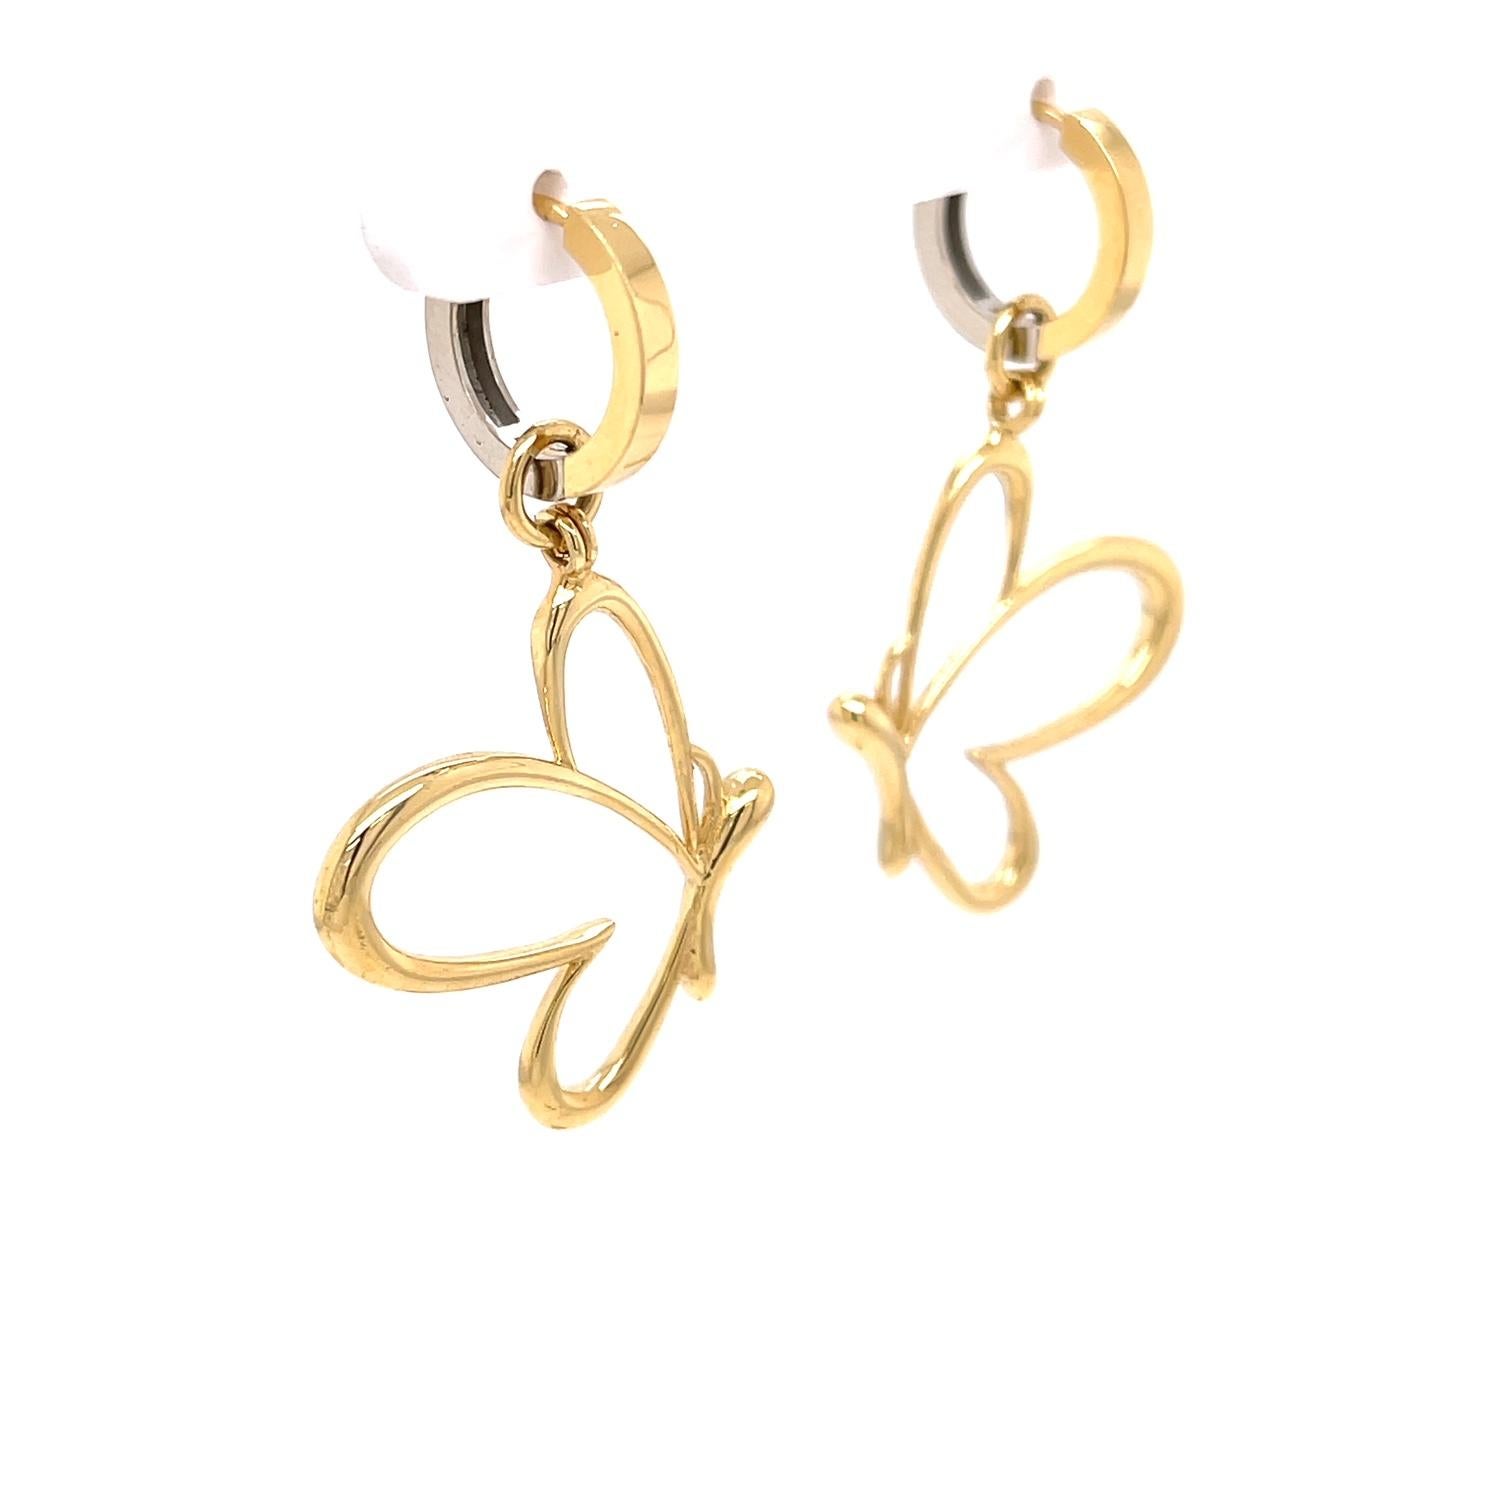 A pair of 18k yellow and white gold reversible huggie hoops with a pair of 18k yellow gold butterfly jackets. These earrings were made and designed by llyn strong.
Items sold separately upon request.